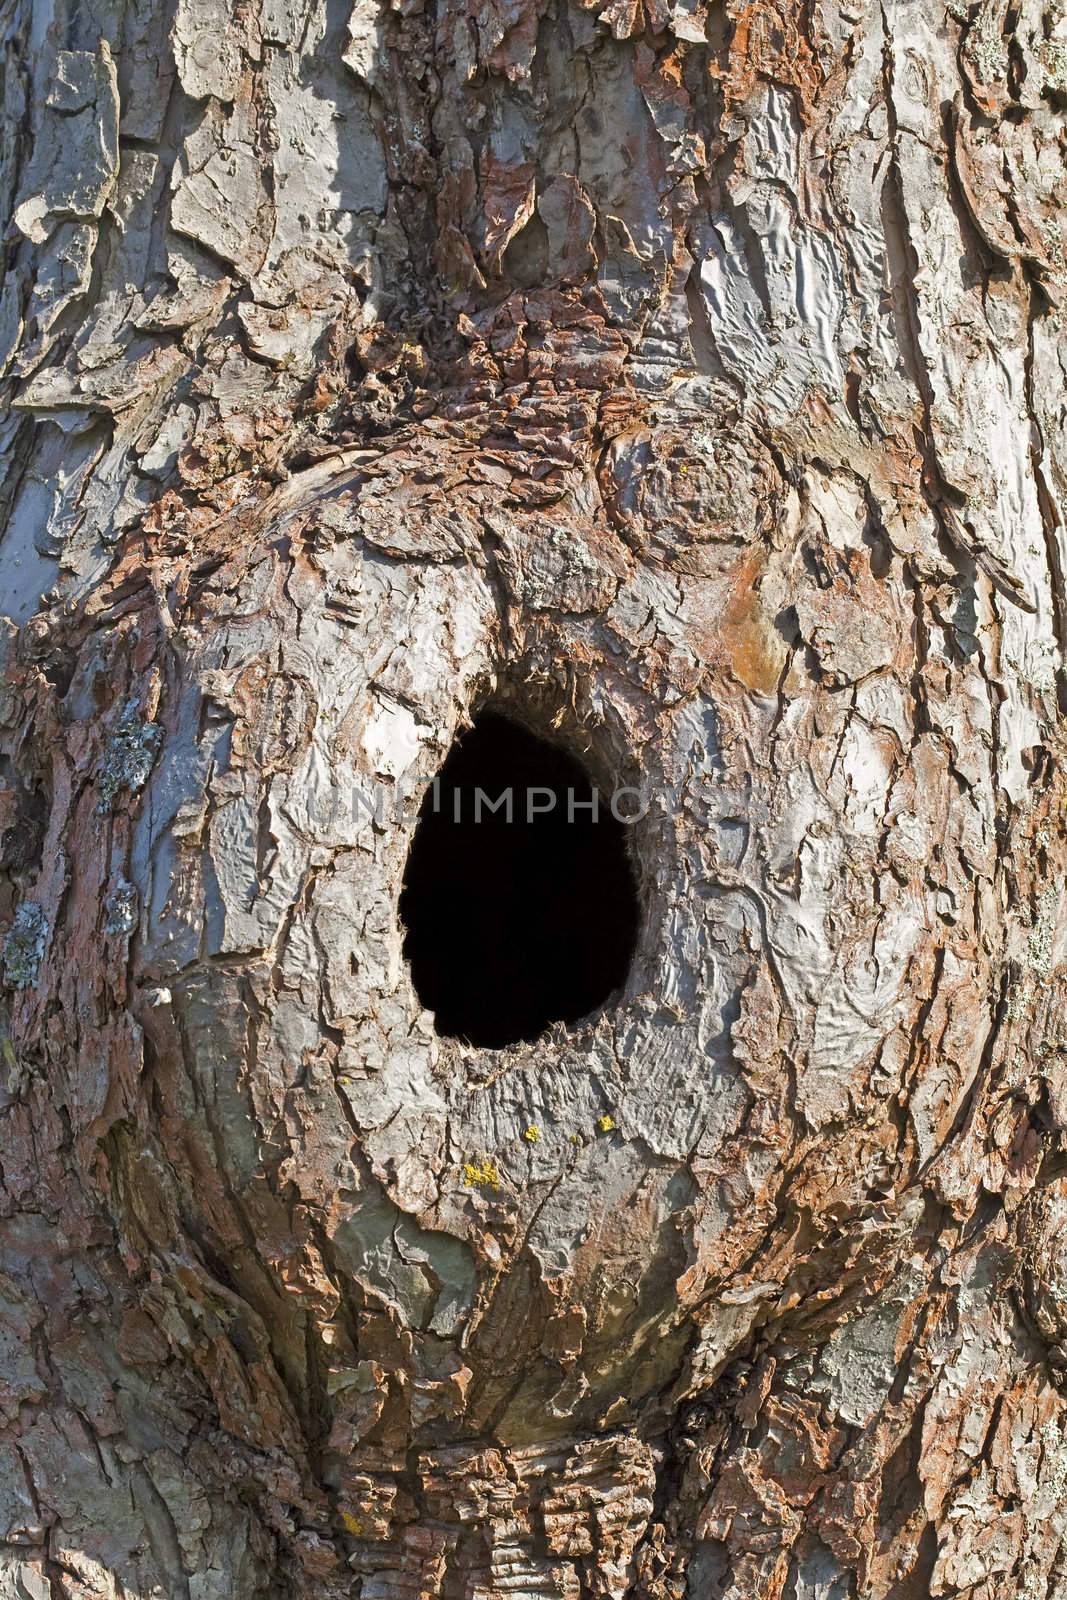 This image shows a trunk with hole